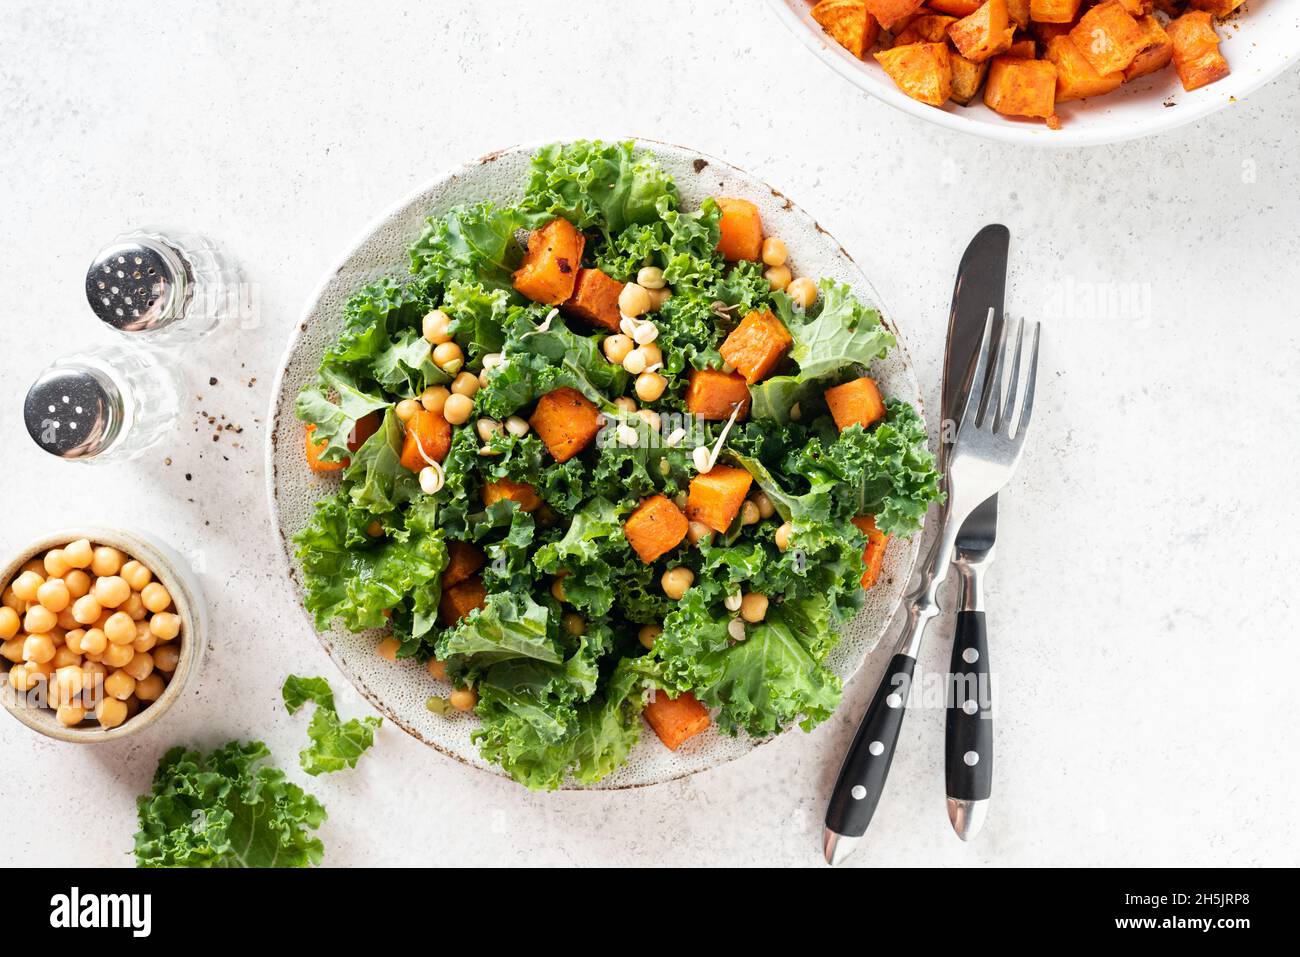 Healthy vegan salad bowl with roasted sweet potato and kale, table top view Stock Photo